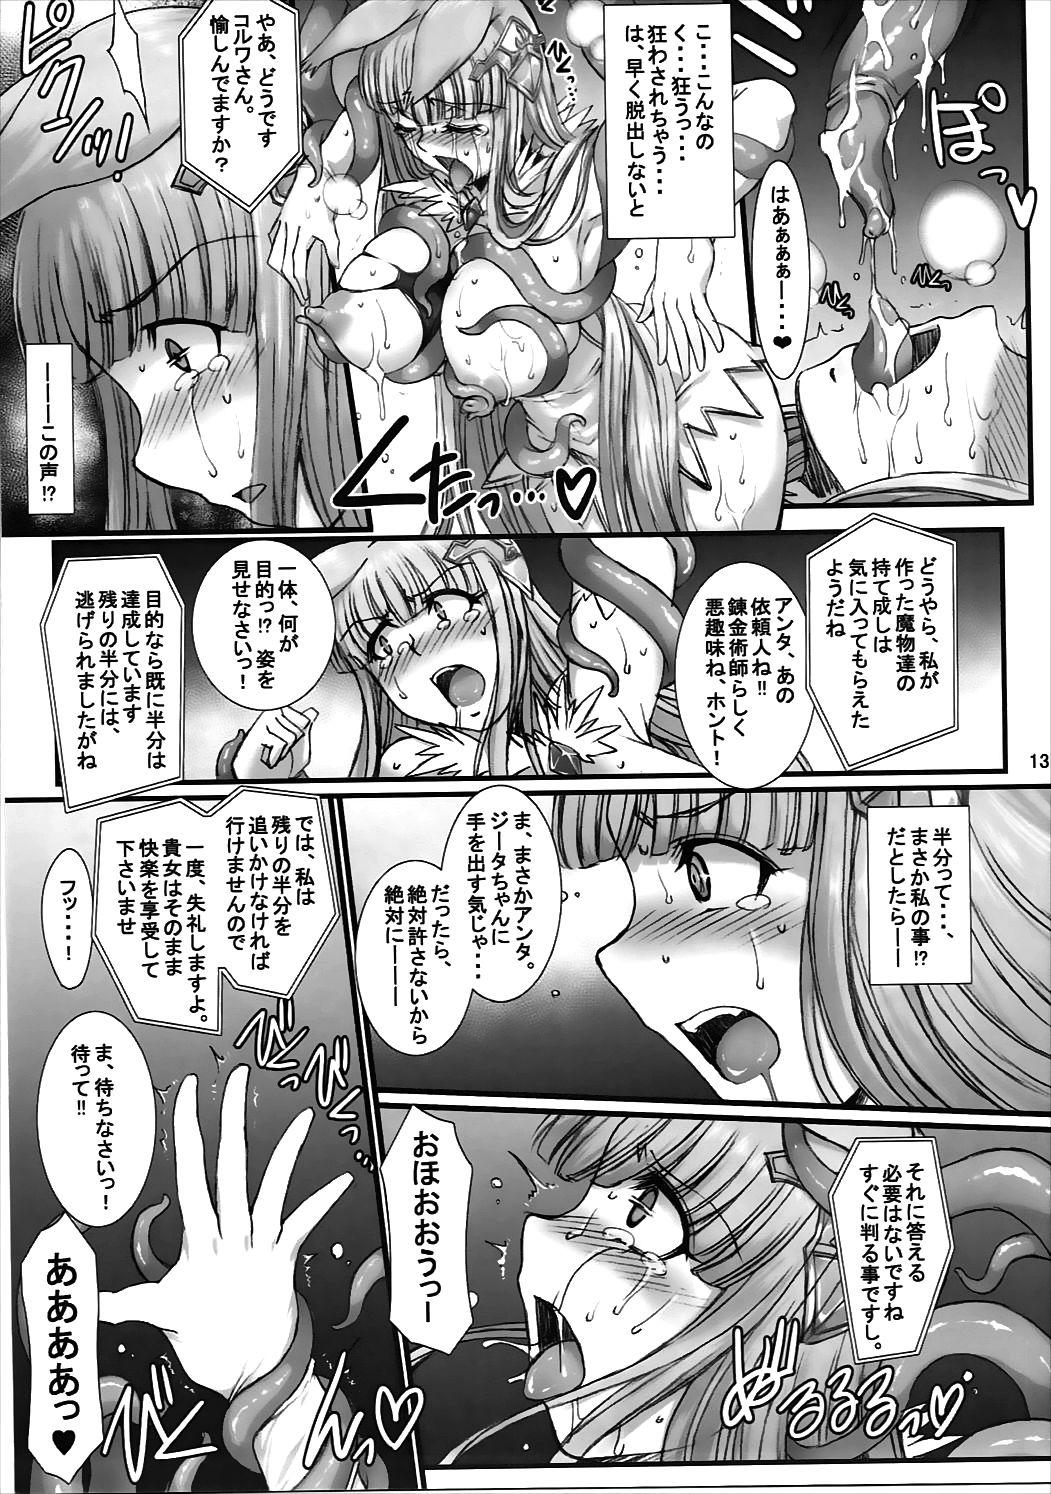 Gym BAD END to Iu Na no HAPPY END - Granblue fantasy Lovers - Page 12